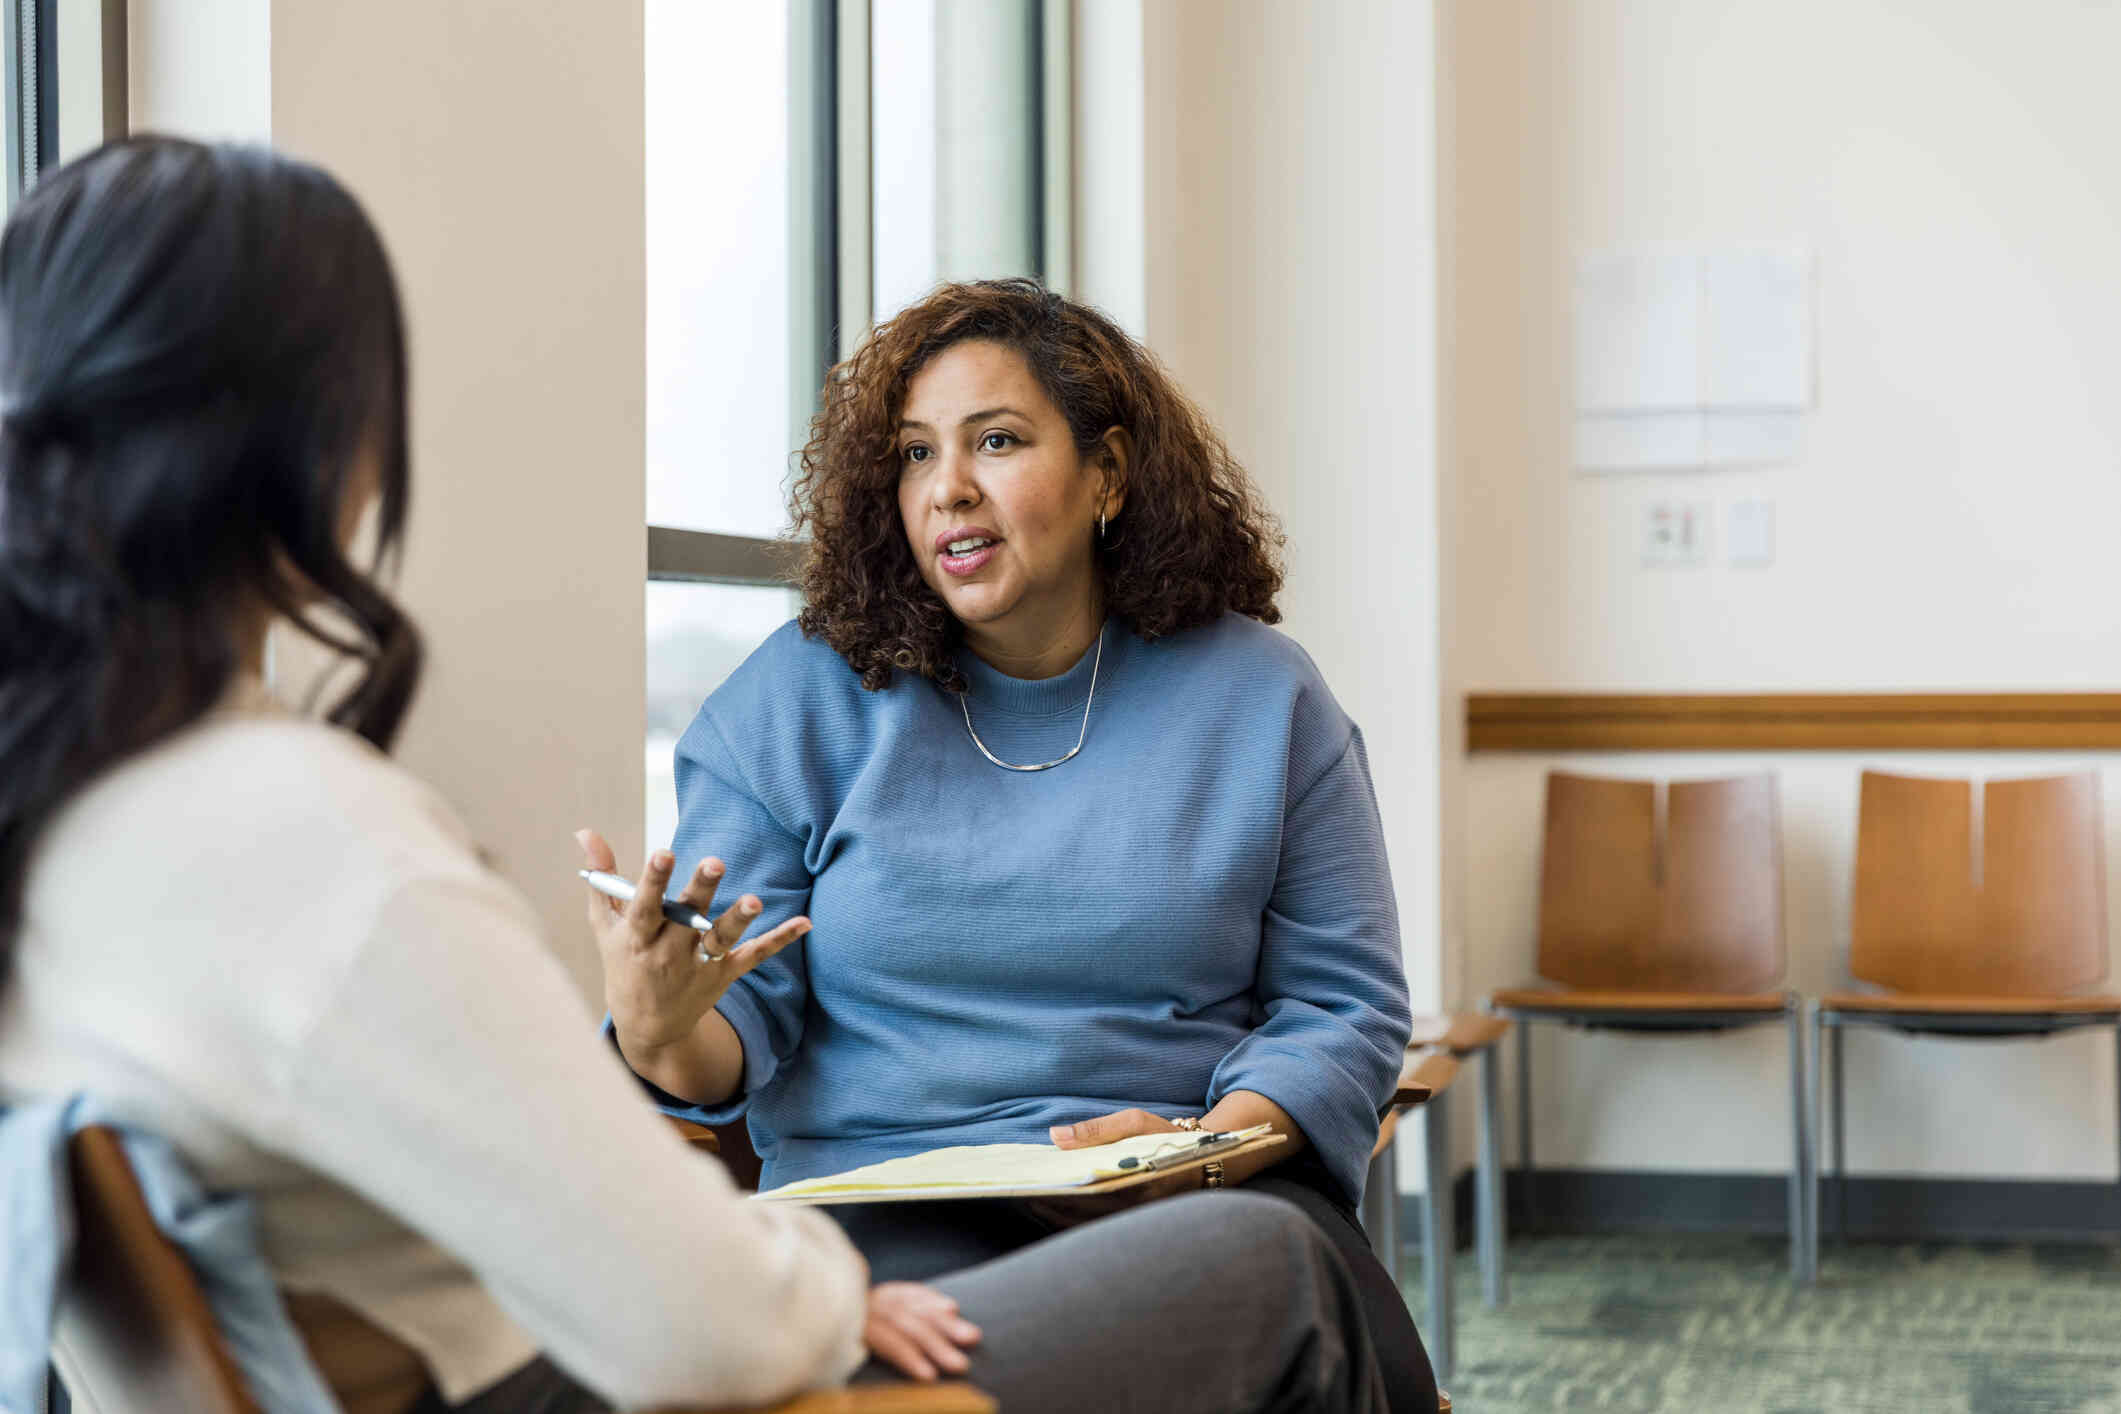 A female therapist in a blue sweater holds a clipboard and sits across from her female patient during a therapy session.